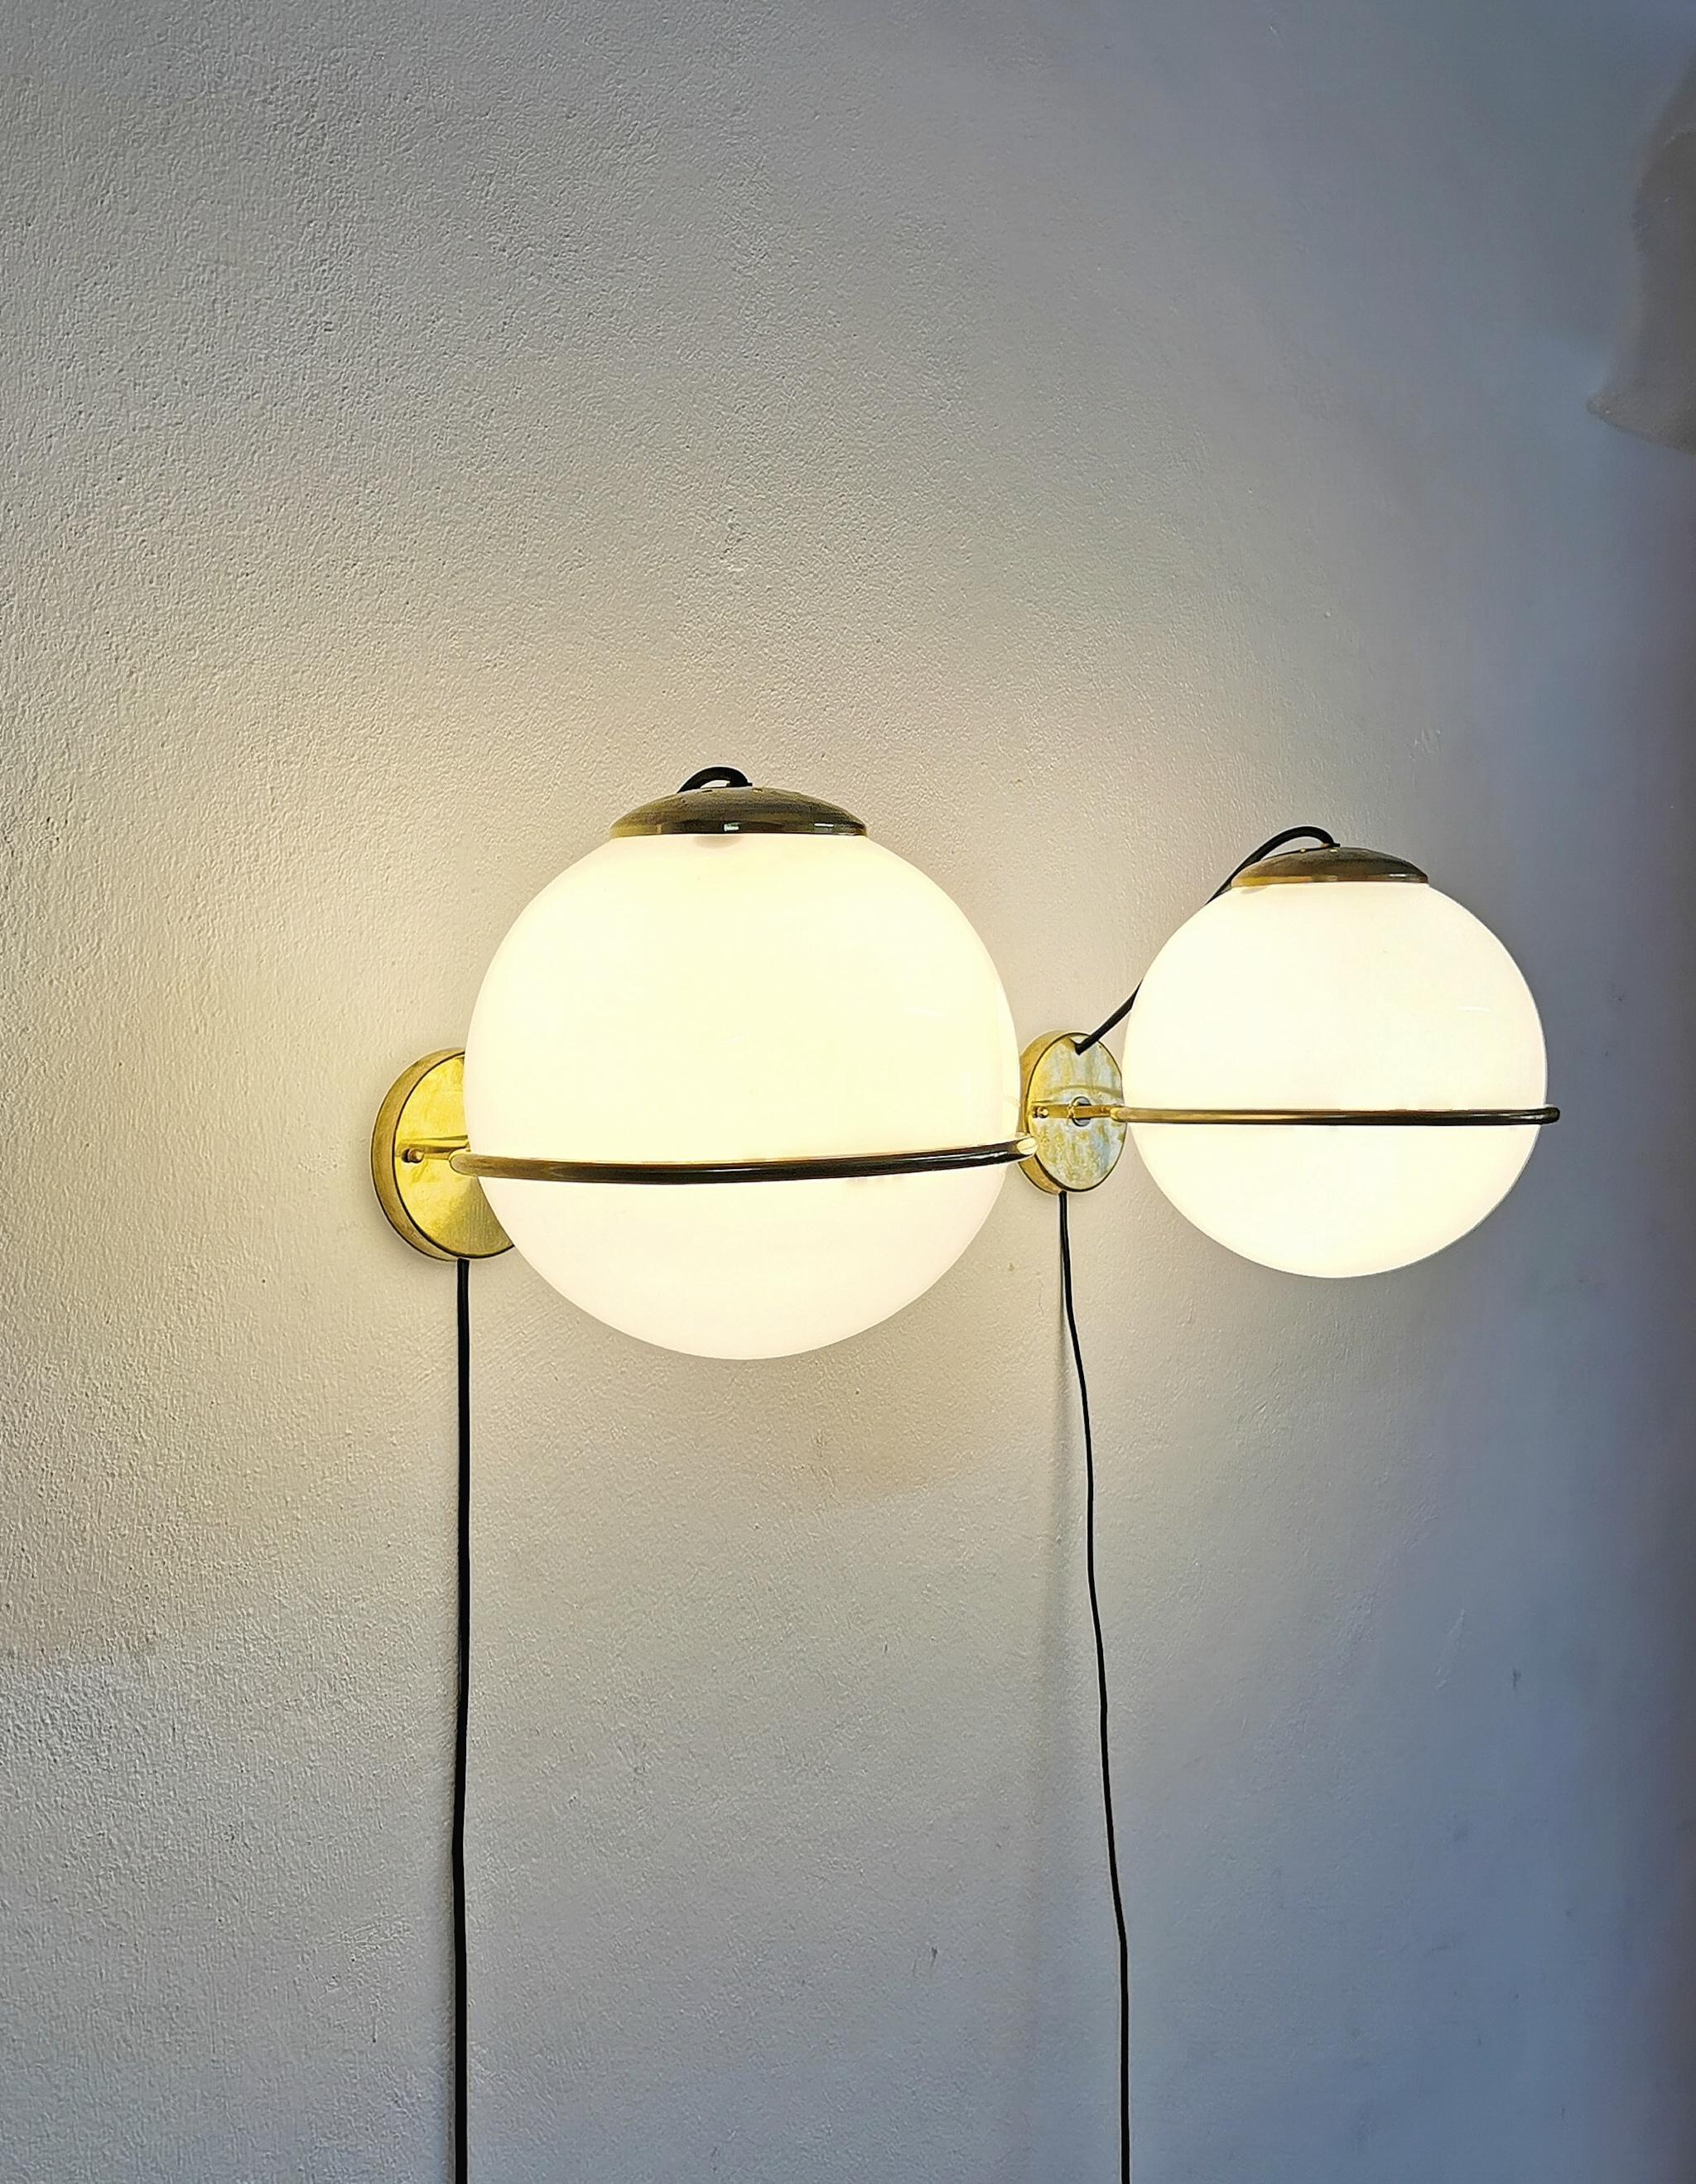 Particular and elegant set of 5 wall lamps with structure entirely in brass and spherical milk white glass diffusers with 1 E27 light. Italian production of the 1960s.